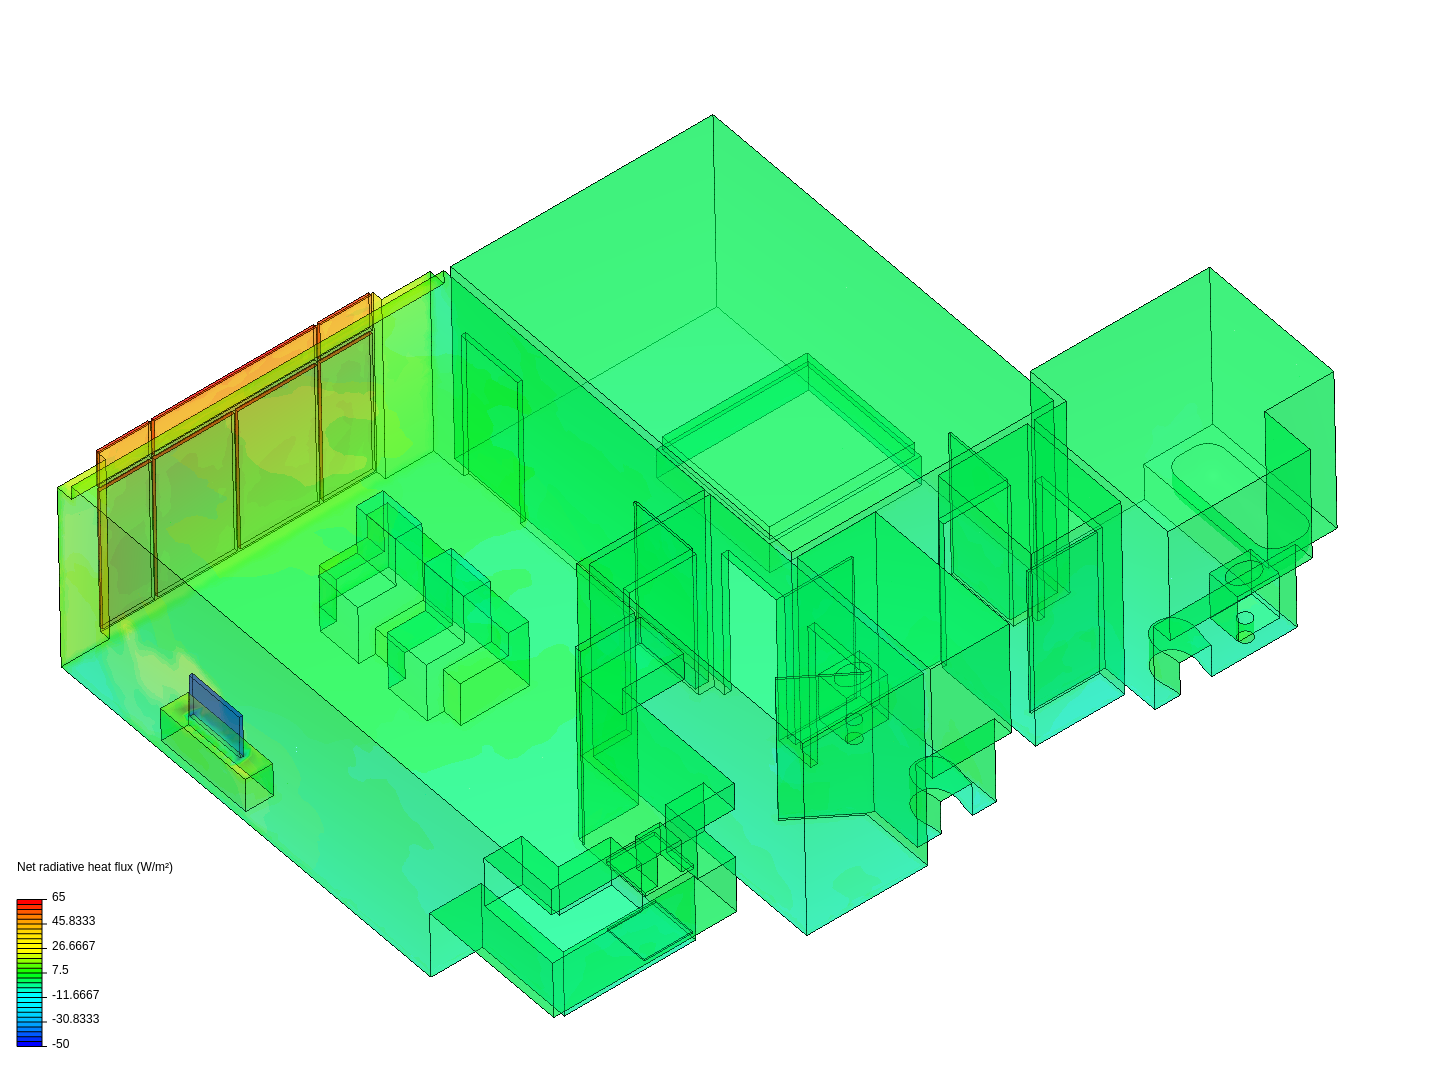 Residential Thermal Comfort image